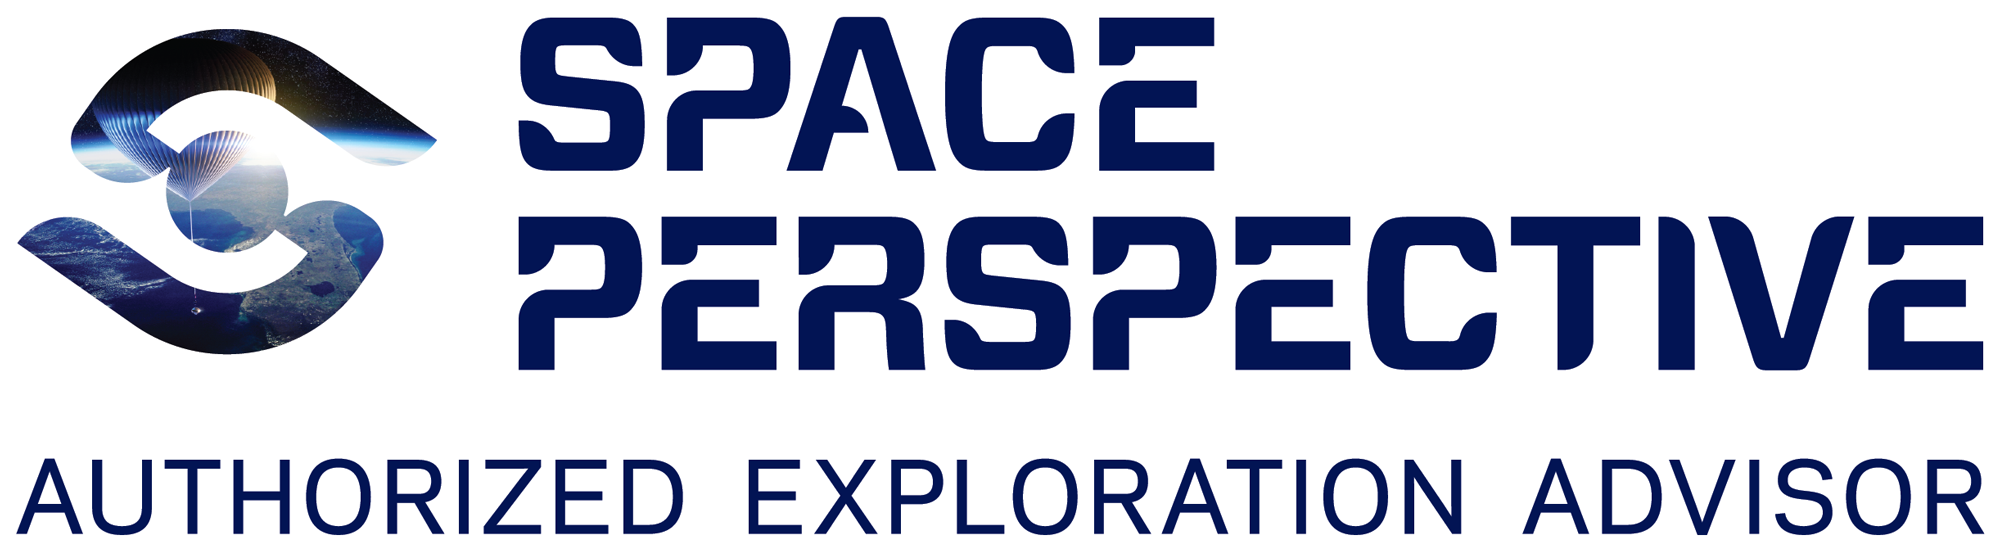 Space Travel Gift Certificates | Travel to Space | Space Perspective ...